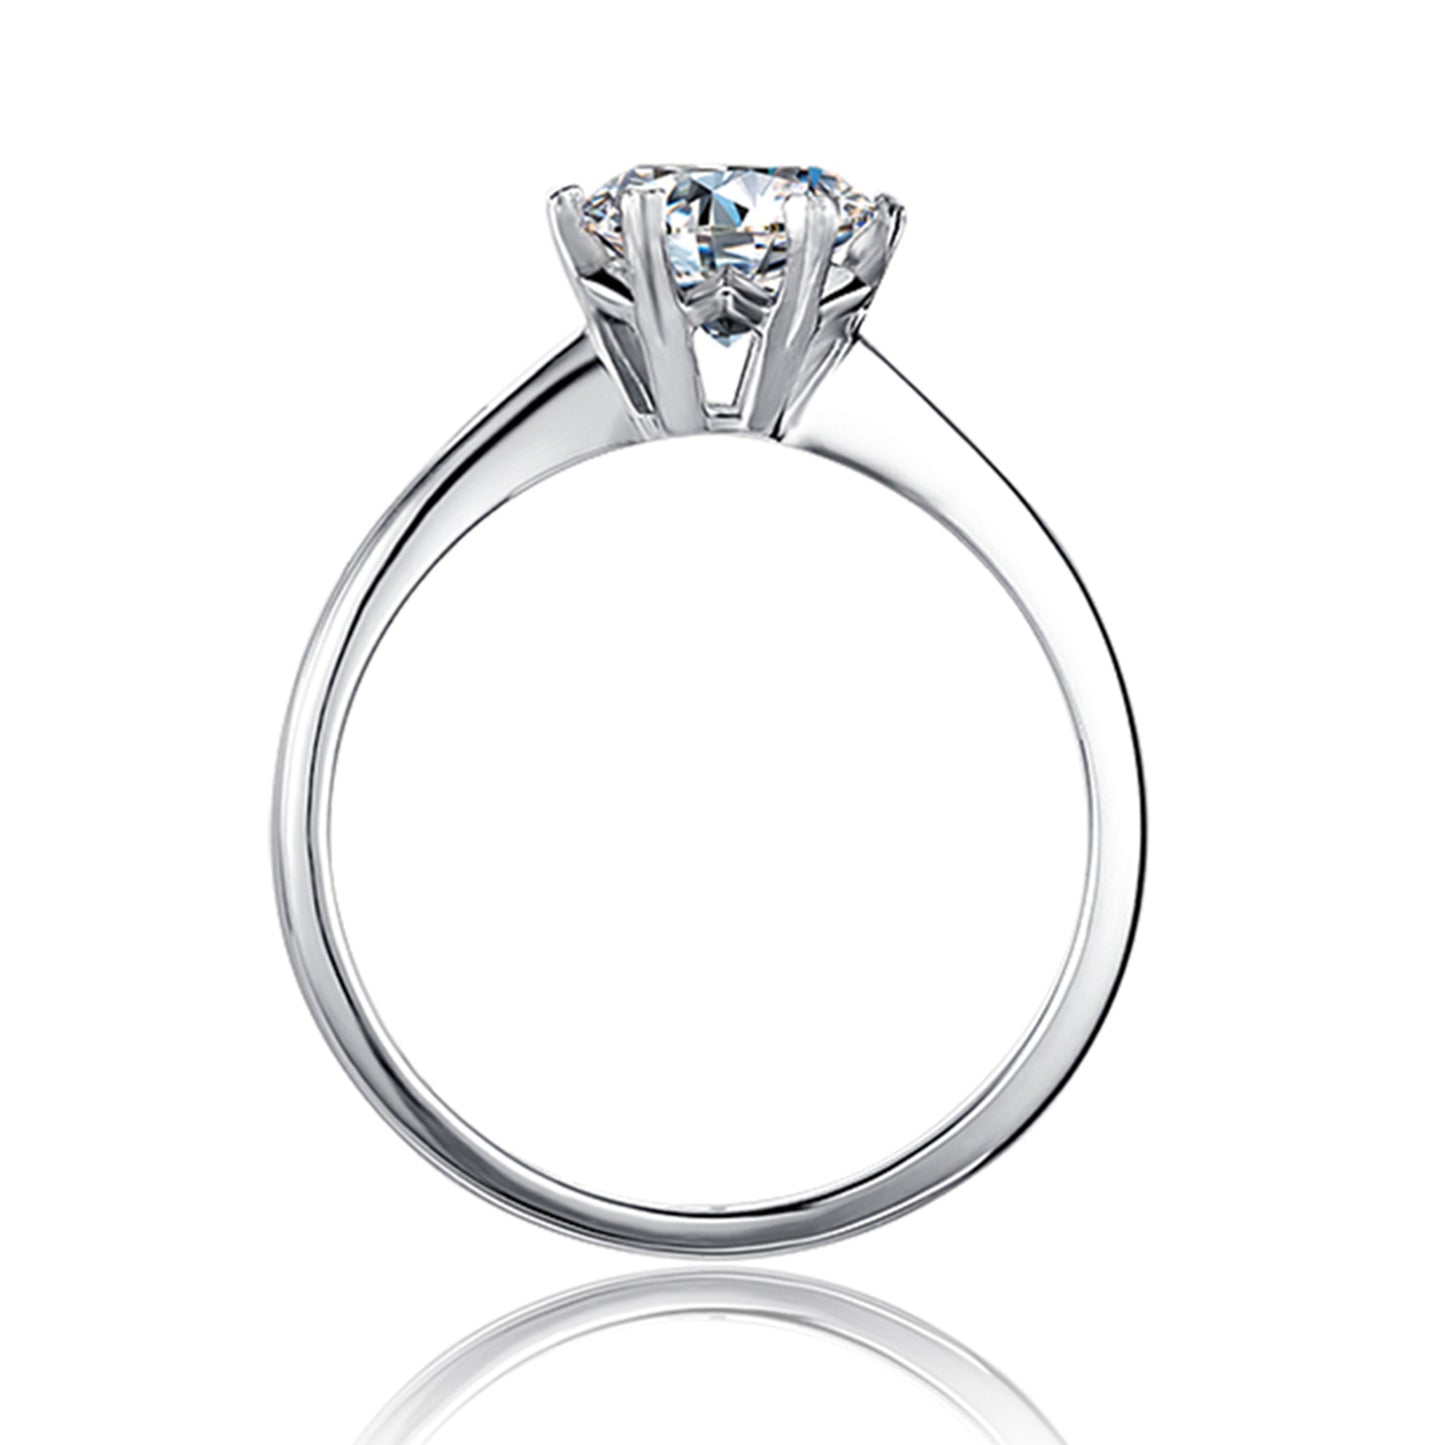 F001 Beautiful Round Cut 0.5/1 Carat Solitaire Engagement Ring In 925s Sterling Silver For Women